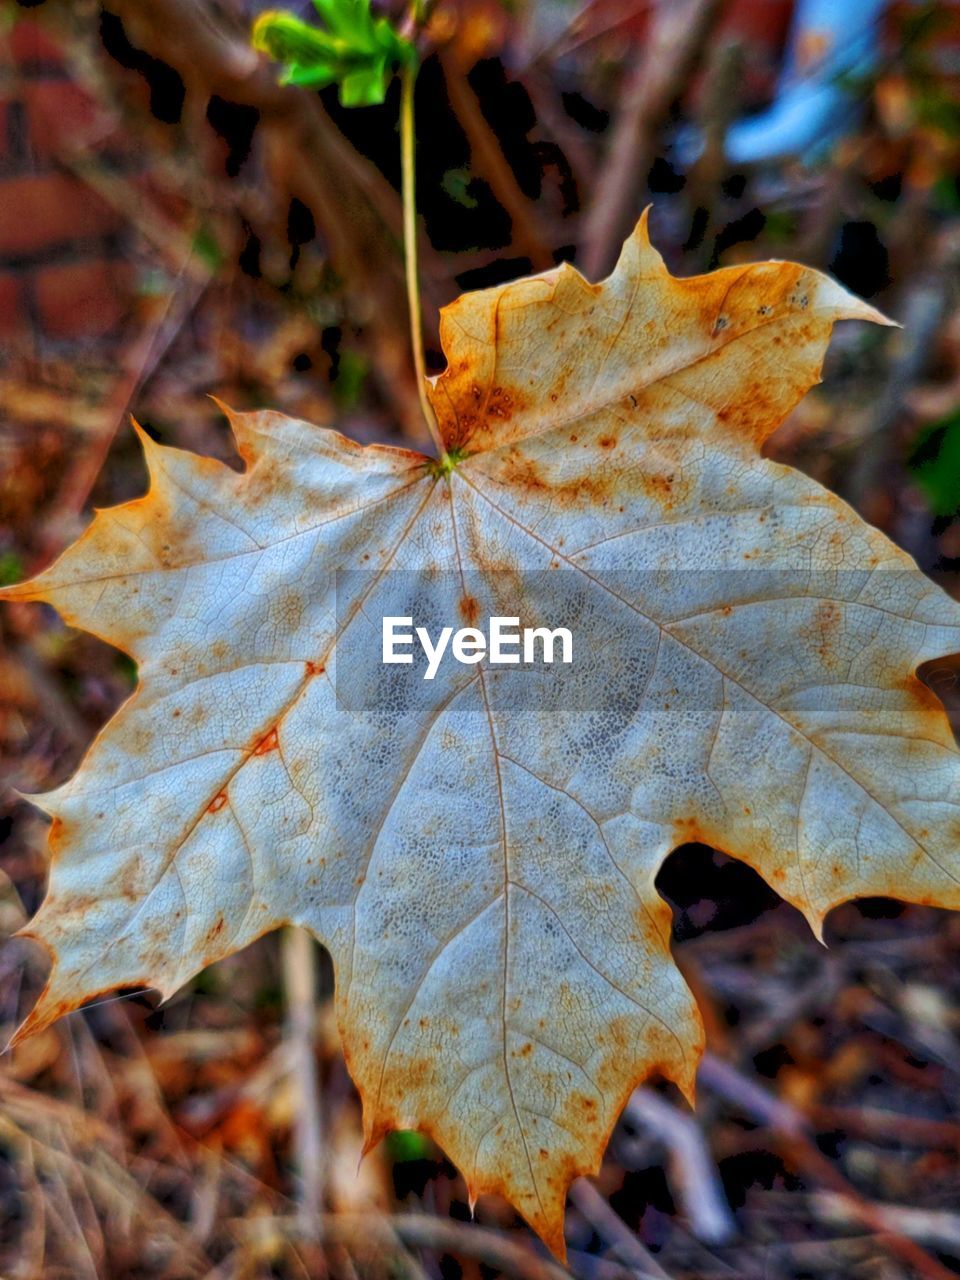 CLOSE-UP OF DRY MAPLE LEAF